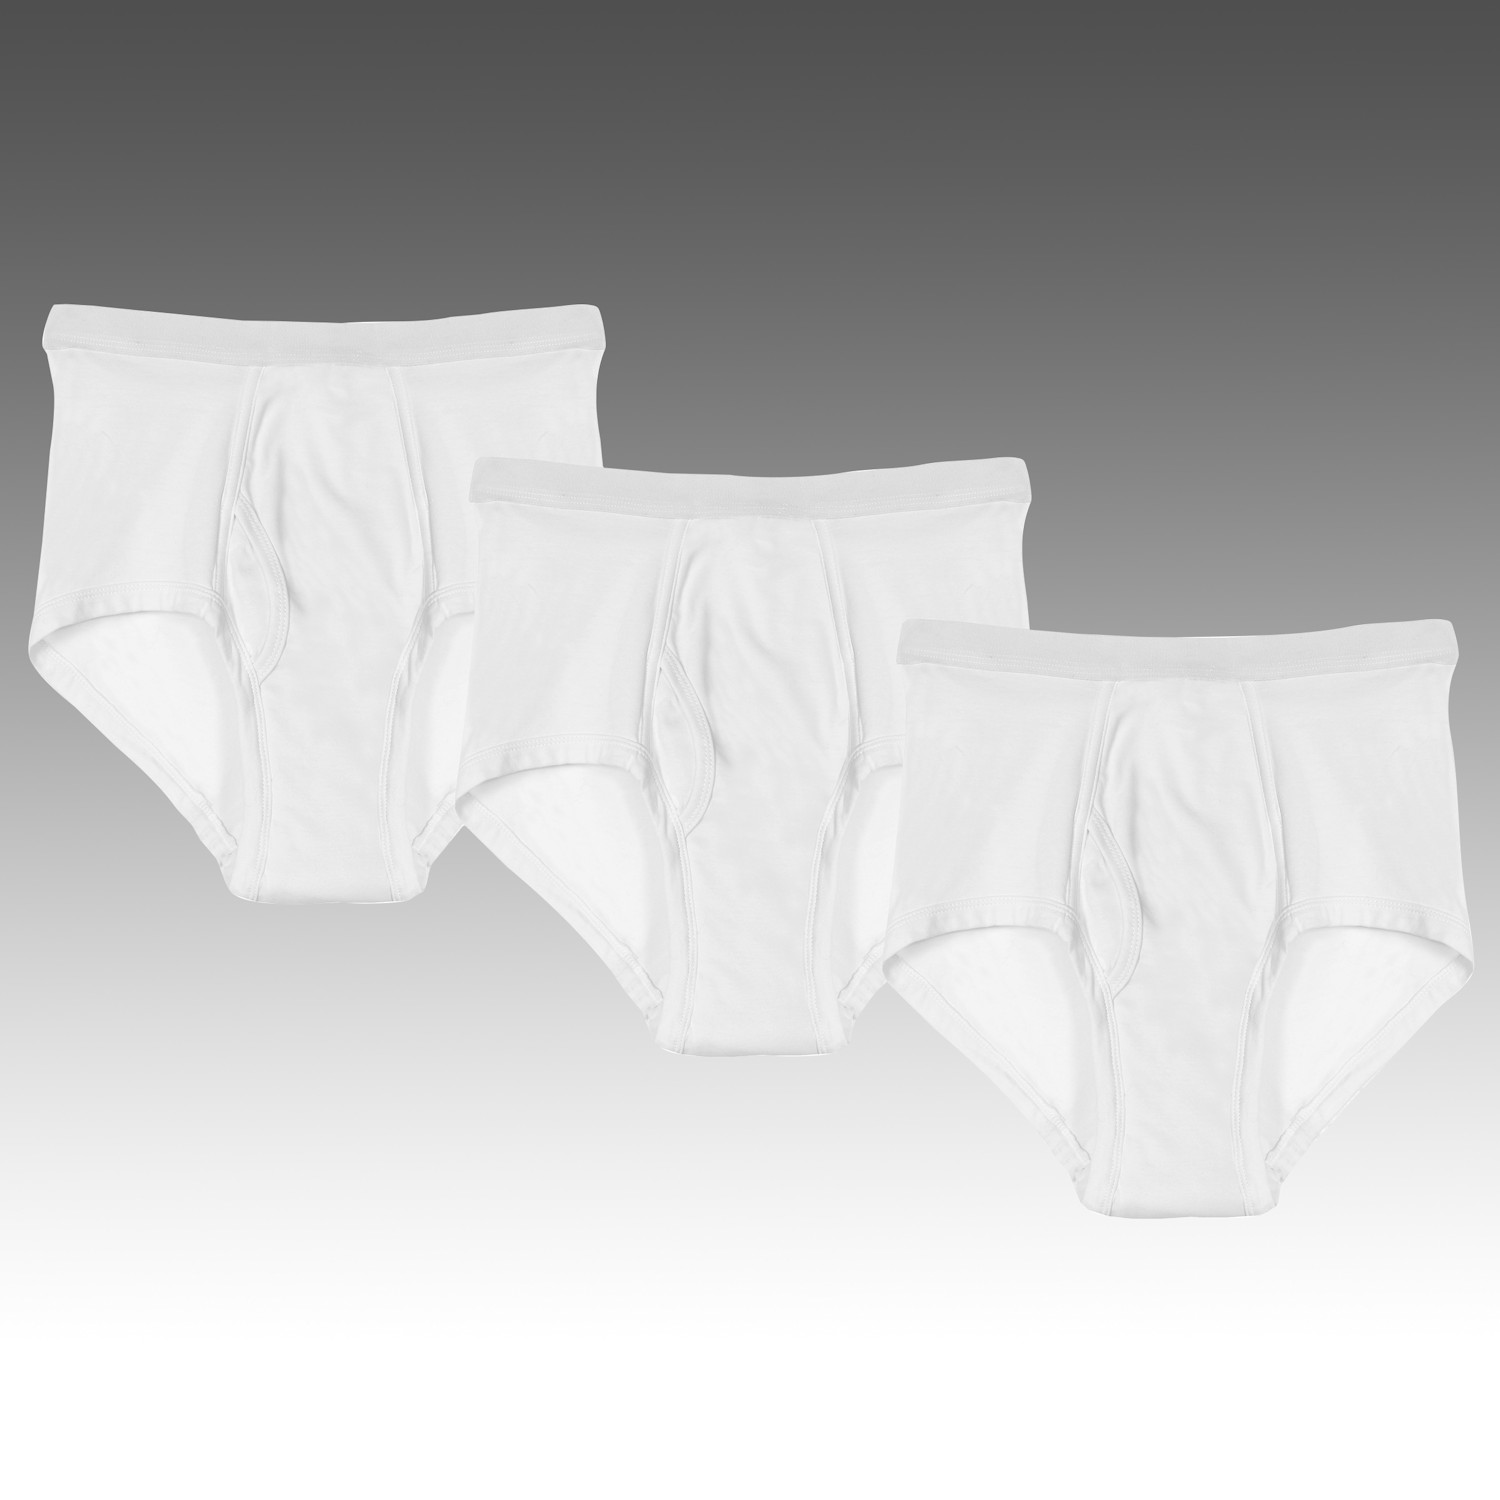 Men's Incontinence Briefs 20 oz. 3 Pack - White | Support Plus